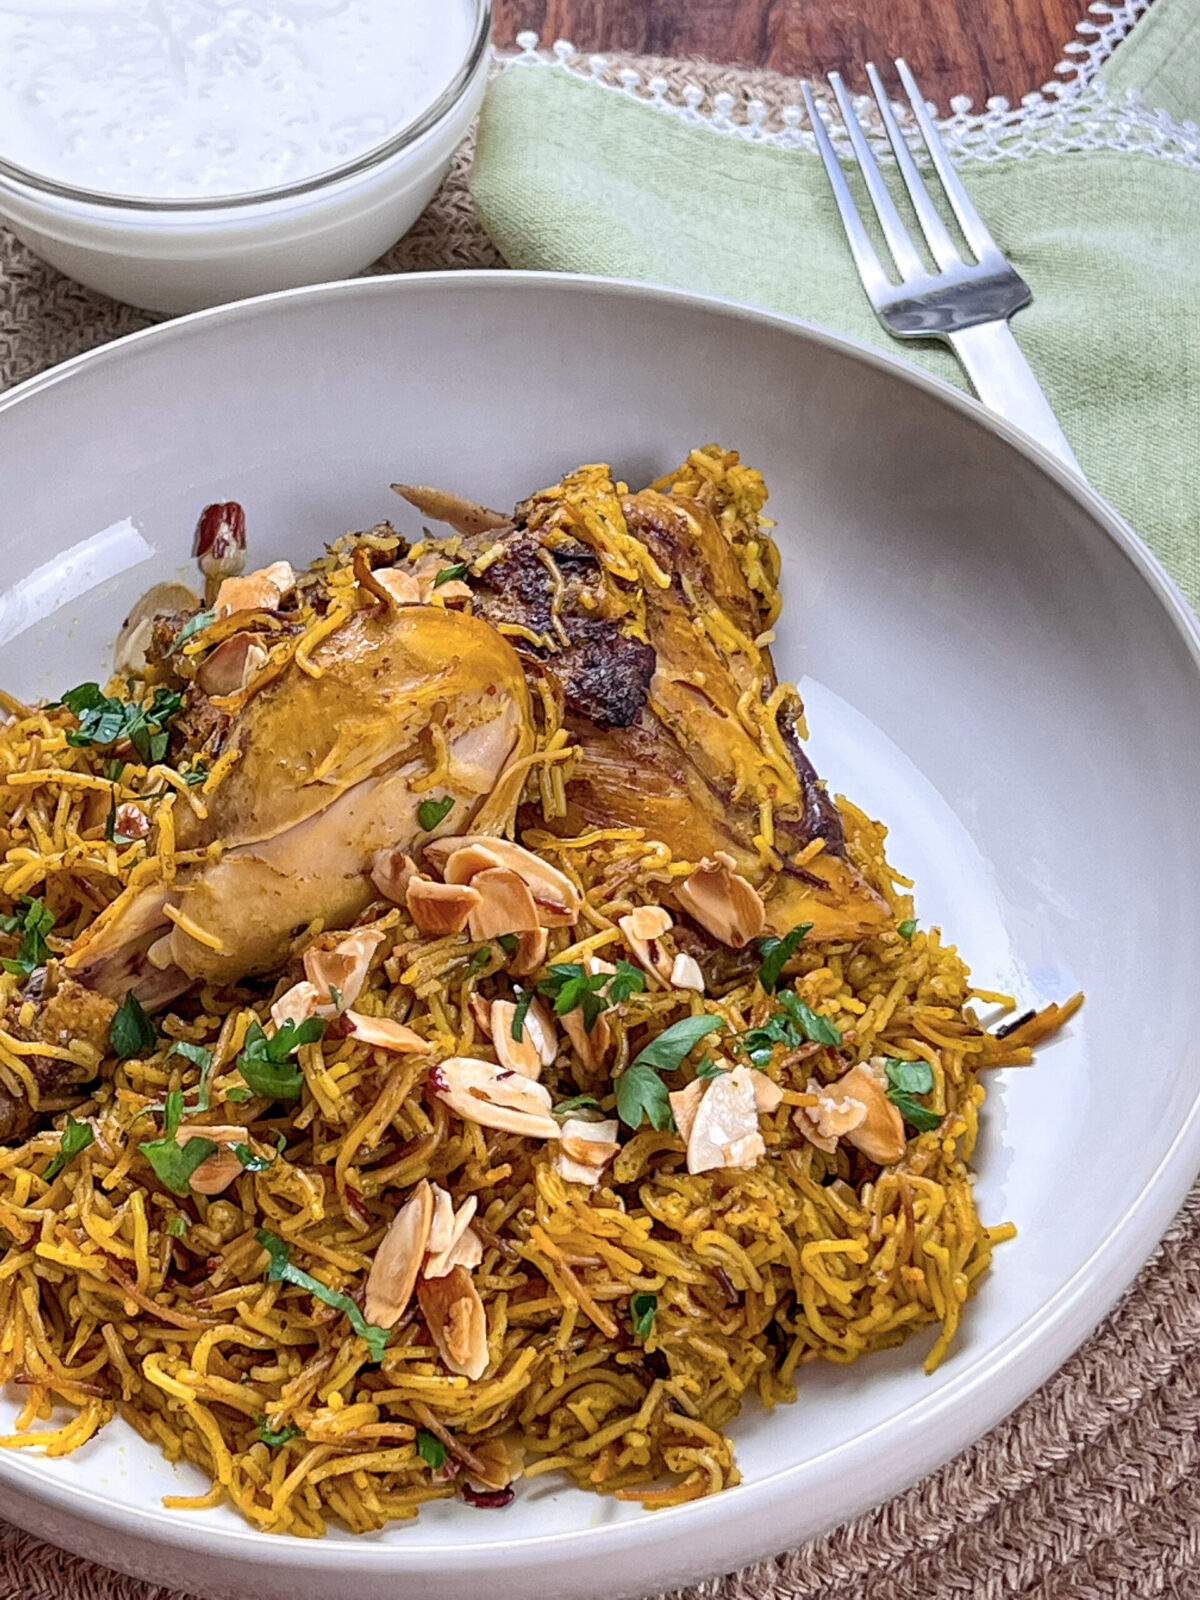 A plate of golden vermicelli noodles topped with seasoned chicken pieces, reflecting traditional Middle Eastern flavors.